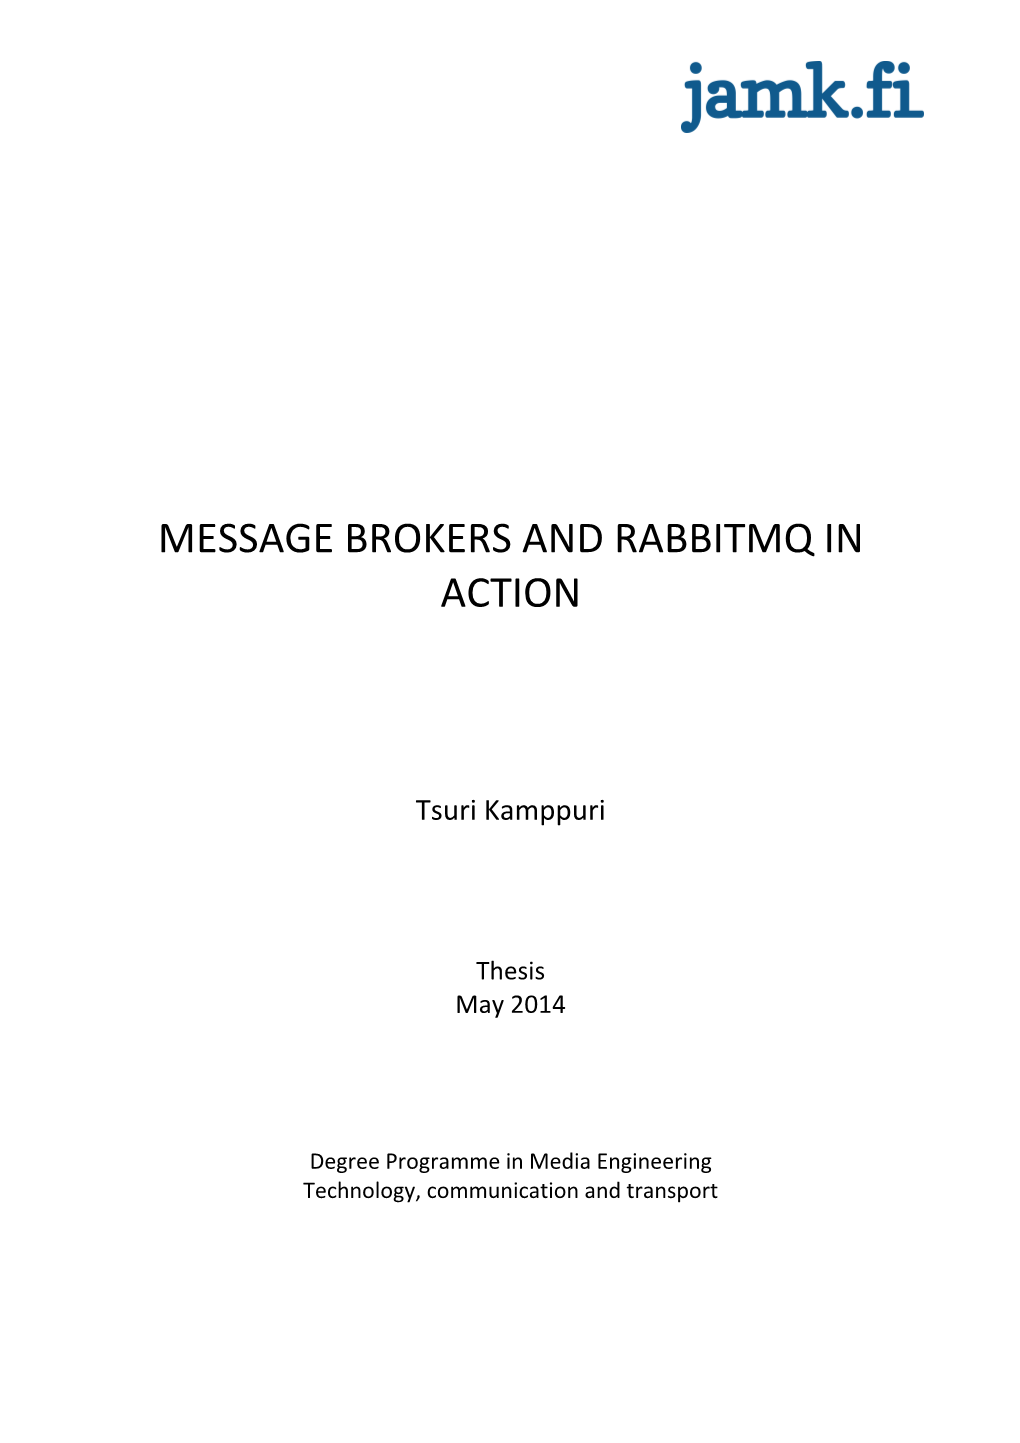 Message Brokers and Rabbitmq in Action